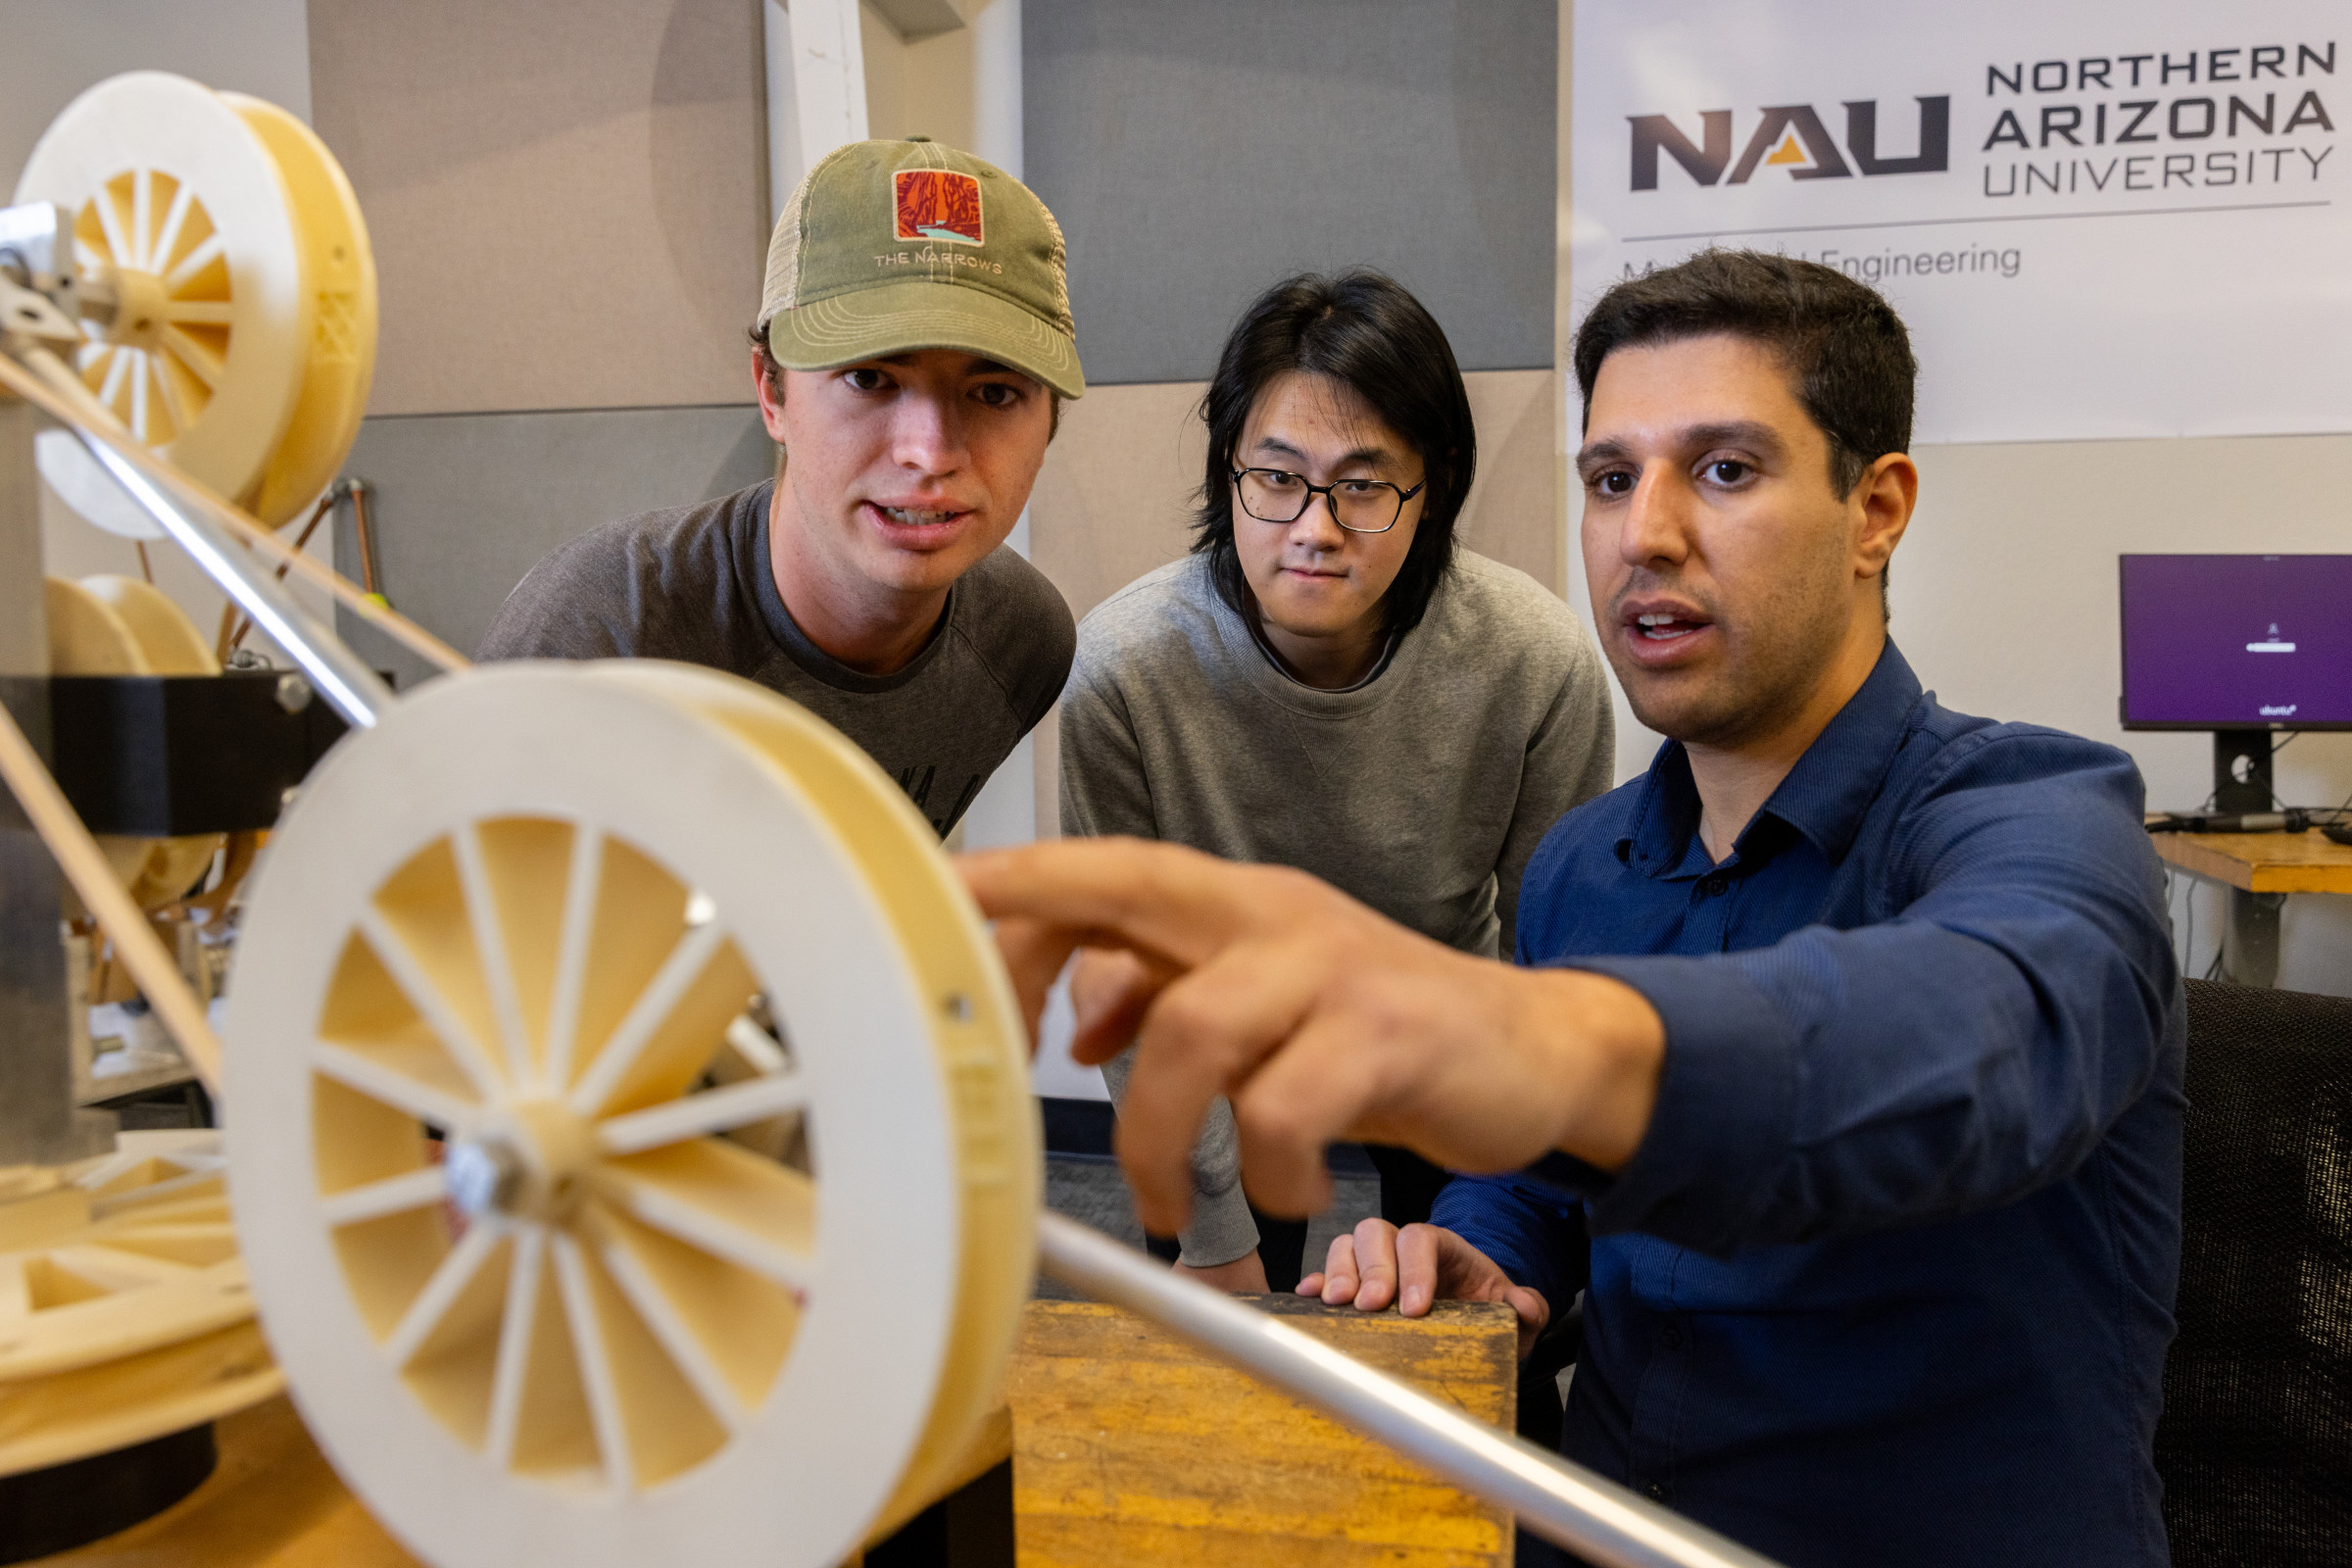 Reza Sharif Razavian pointing at a turning wheel as two students look on